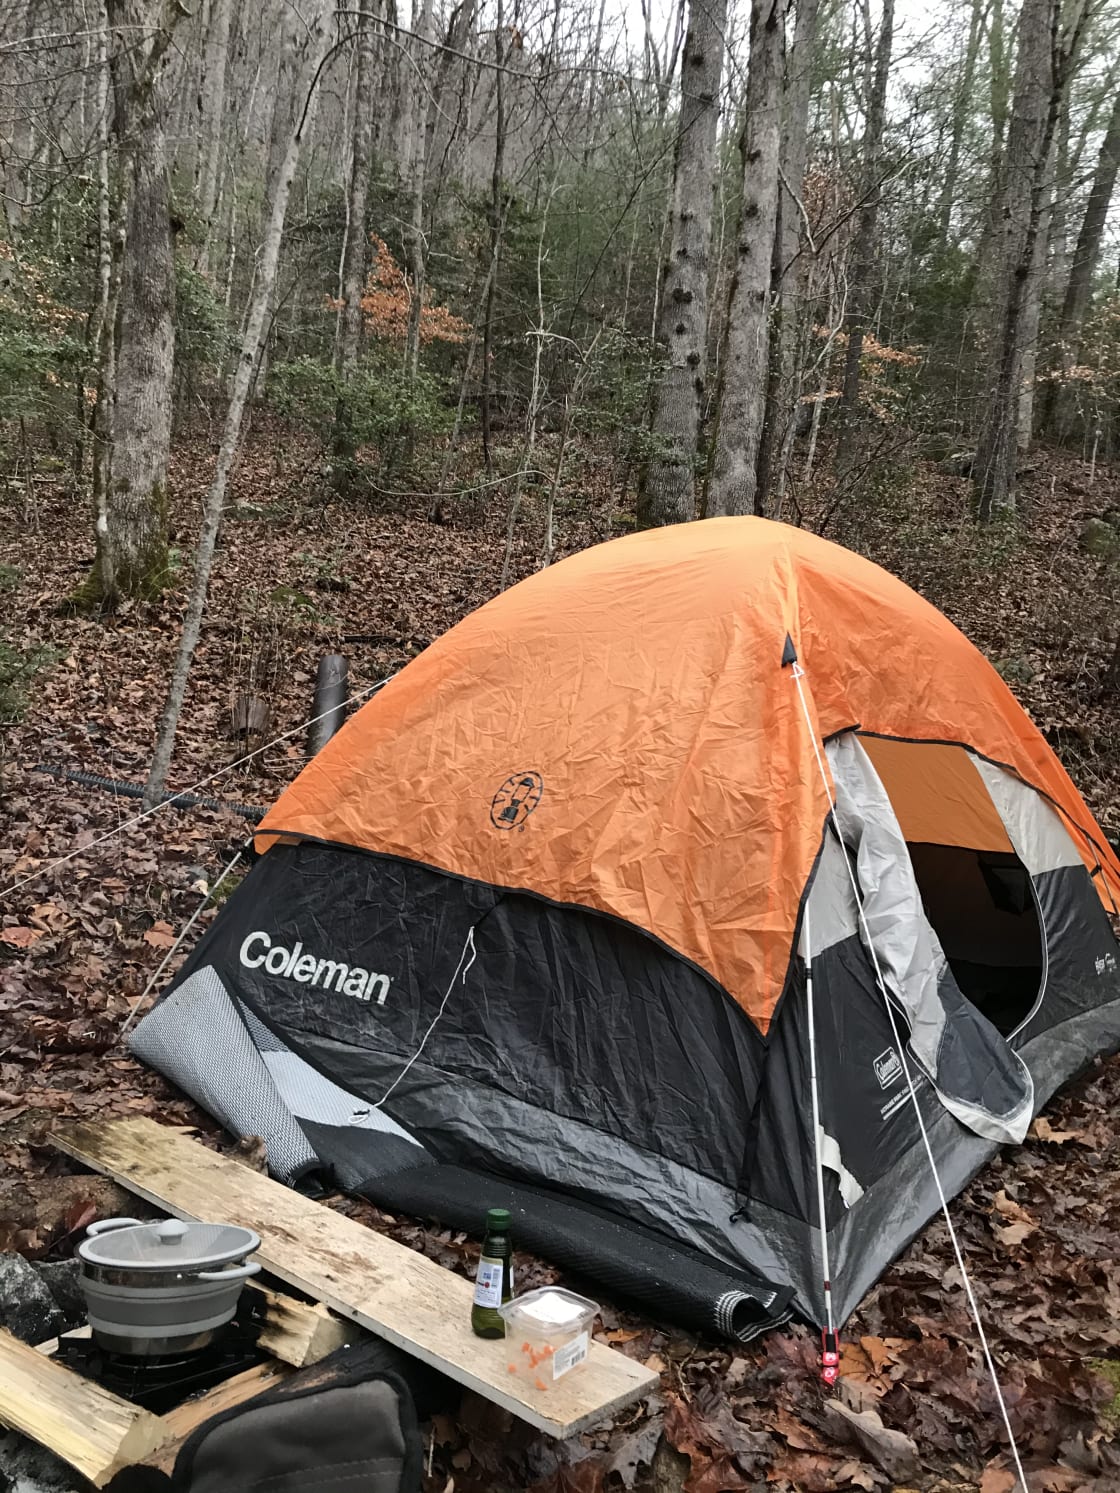 I chose the flattest and closest plot to the workshop to camp. Their was a firepit and stream. In winter, the neighbors were visible, but that did not bother me since it was a rainy night spent reading and listening to music in my cozy tent!

Hammock camping is the way to go on this property.